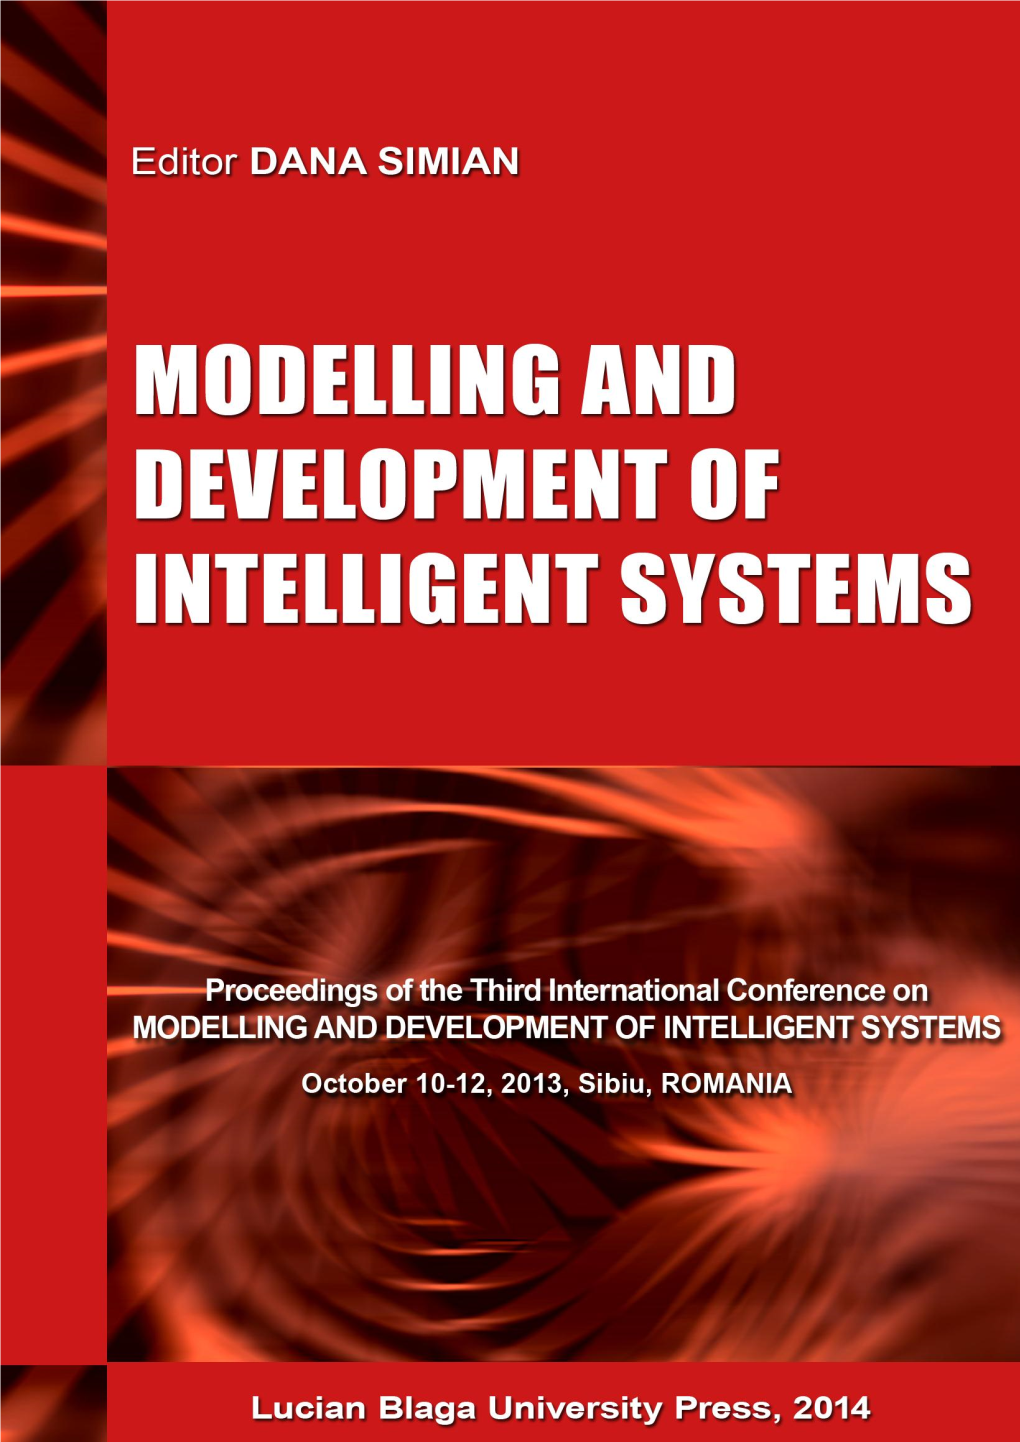 Proceedings of MDIS 2013 Conference